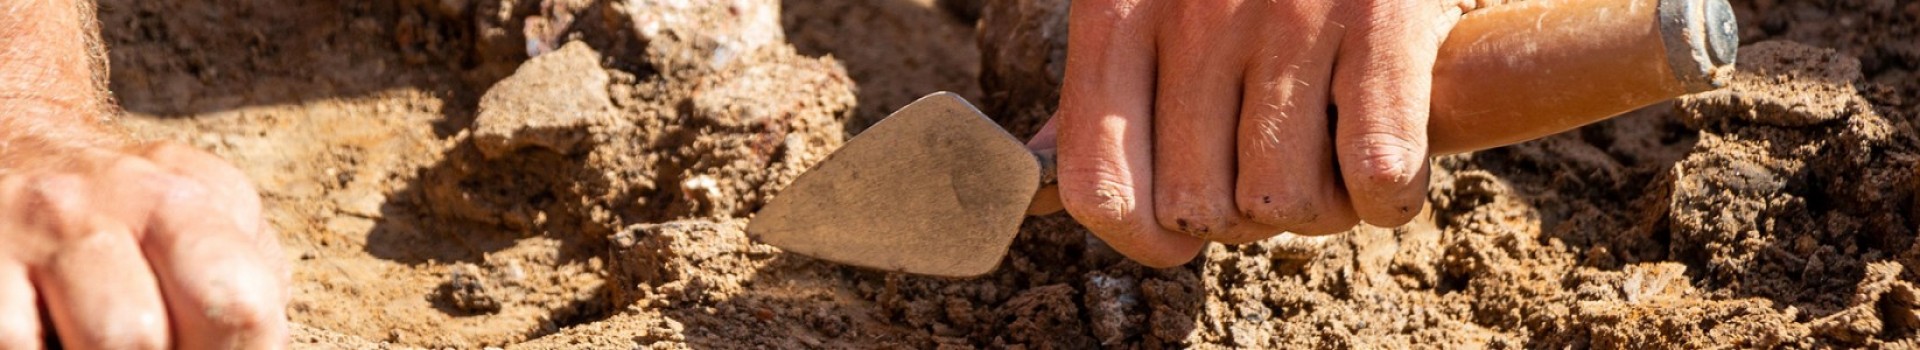 A detail of a trowel being used to excavate and archaeological feature.